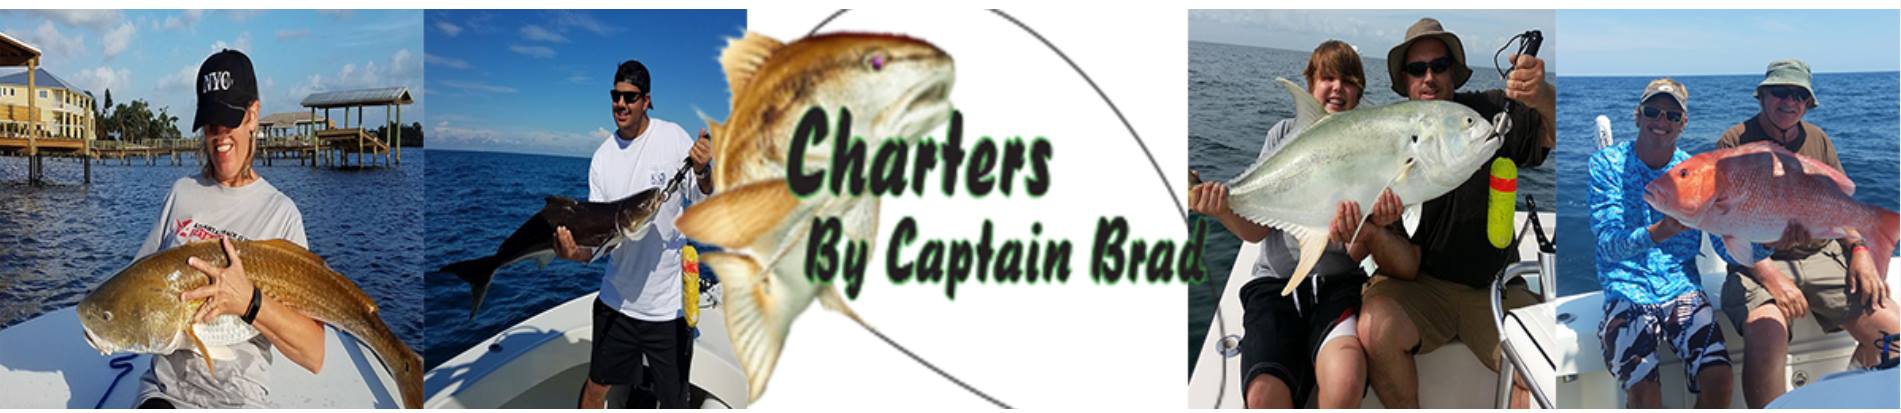 Charters by Captain Brad